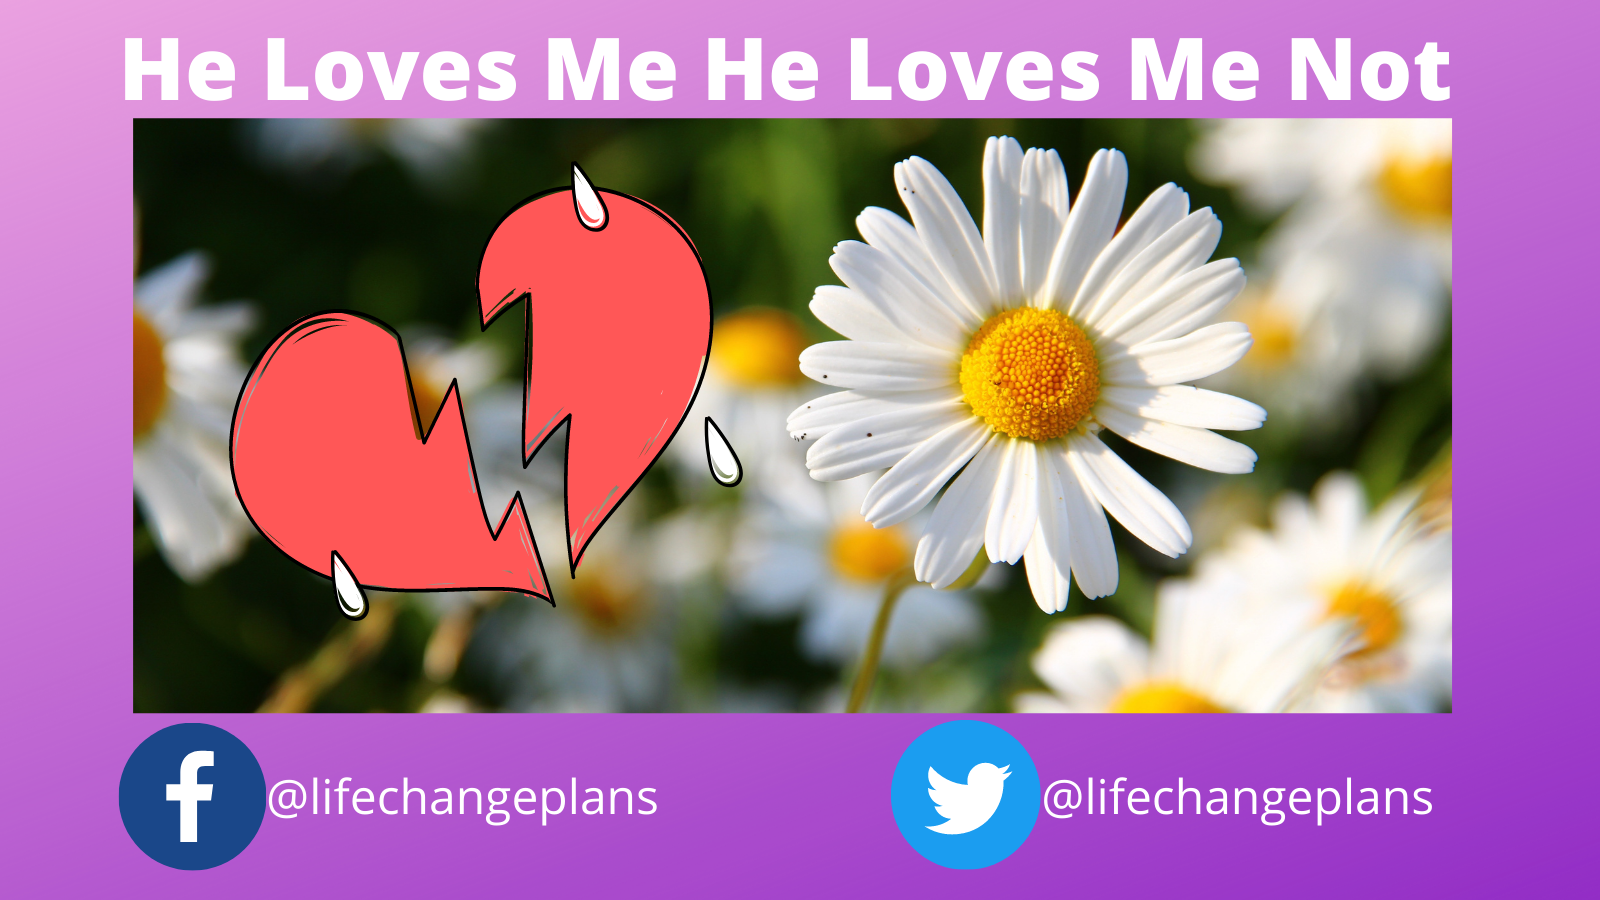 Dealing with sadness and disappointment, he loves me he loves me not.